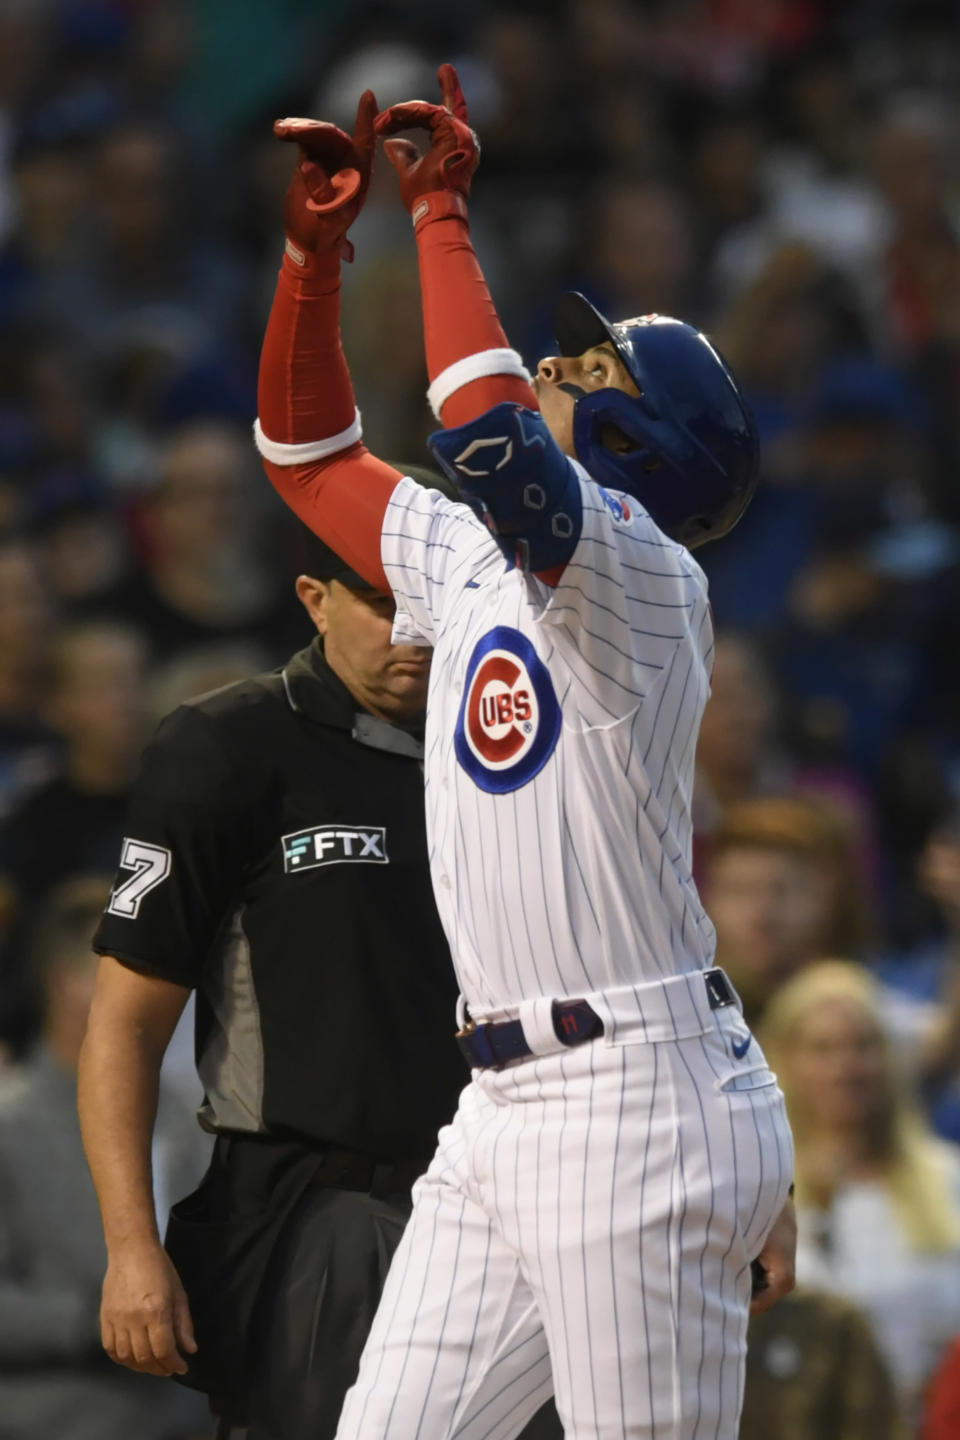 Chicago Cubs' Christopher Morel celebrates at home plate after hitting a two-run home run during the third inning of baseball game against the Washington Nationals, Monday, Aug. 8, 2022, in Chicago. (AP Photo/Paul Beaty)